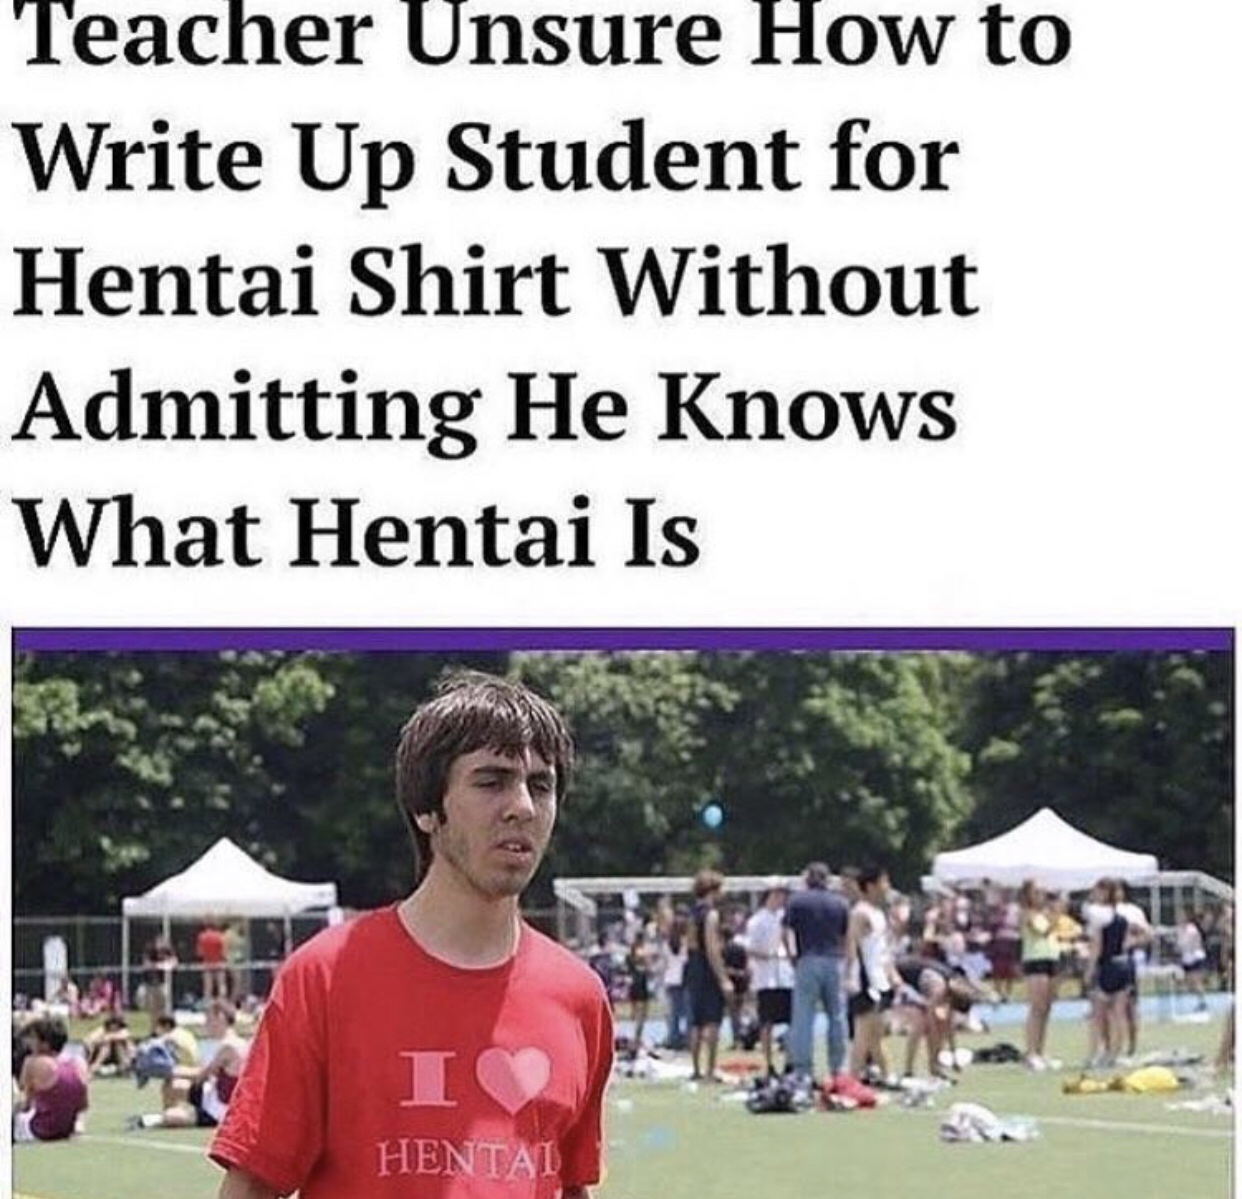 teacher unsure how to write up student s what hentai is - Teacher Unsure How to Write Up Student for Hentai Shirt Without Admitting He Knows What Hentai Is Hentai